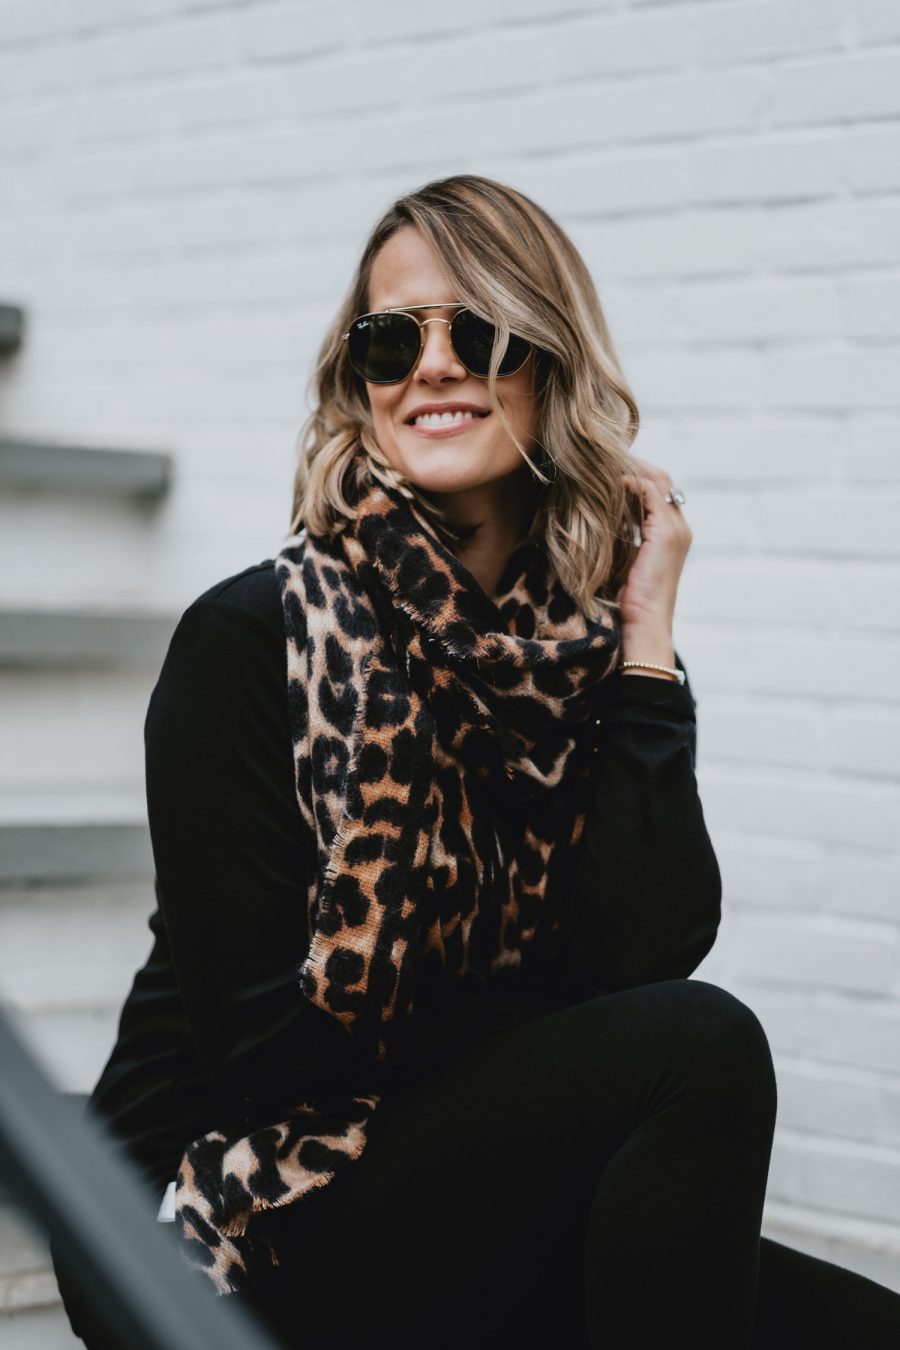 Edgy outfit ideas--all black with leopard scarf and combat boots